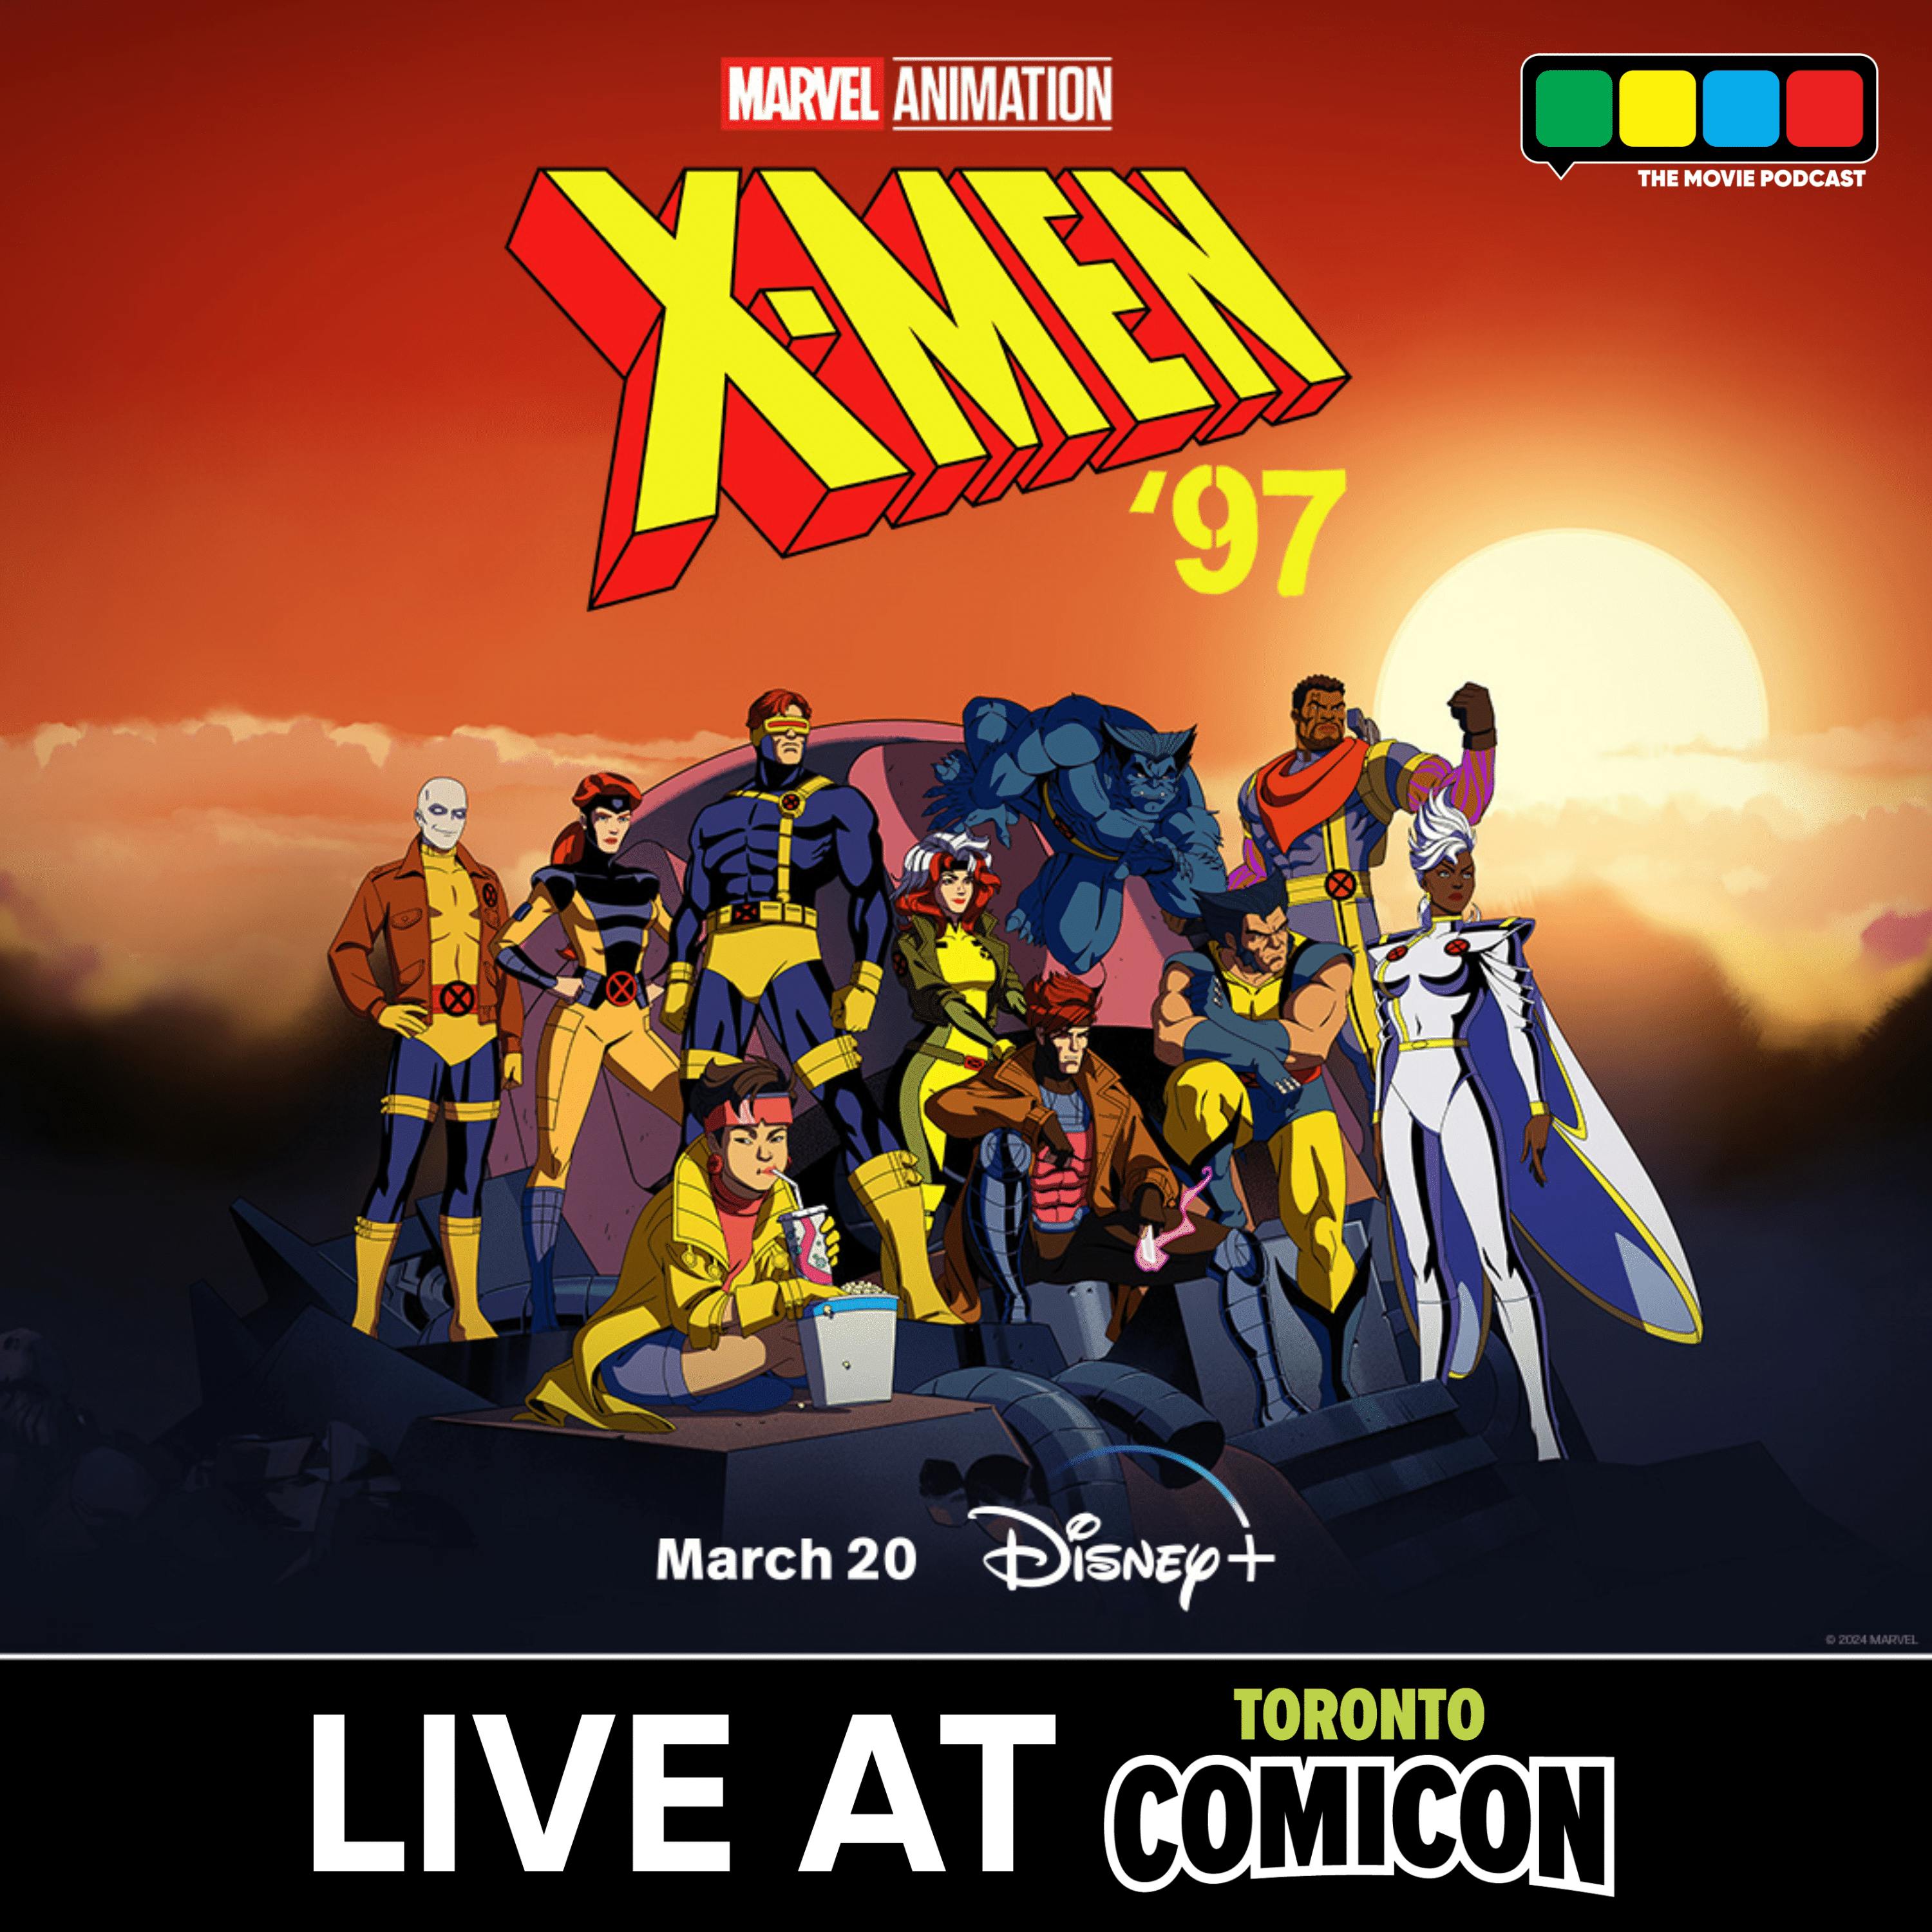 X-Men 97 LIVE at Toronto Comicon with Lenore Zann, Alyson Court, George Buza, Adrian Hough, Lawrence Bayne, & Original Animated Series Producer Larry Houston - Marvel Animation